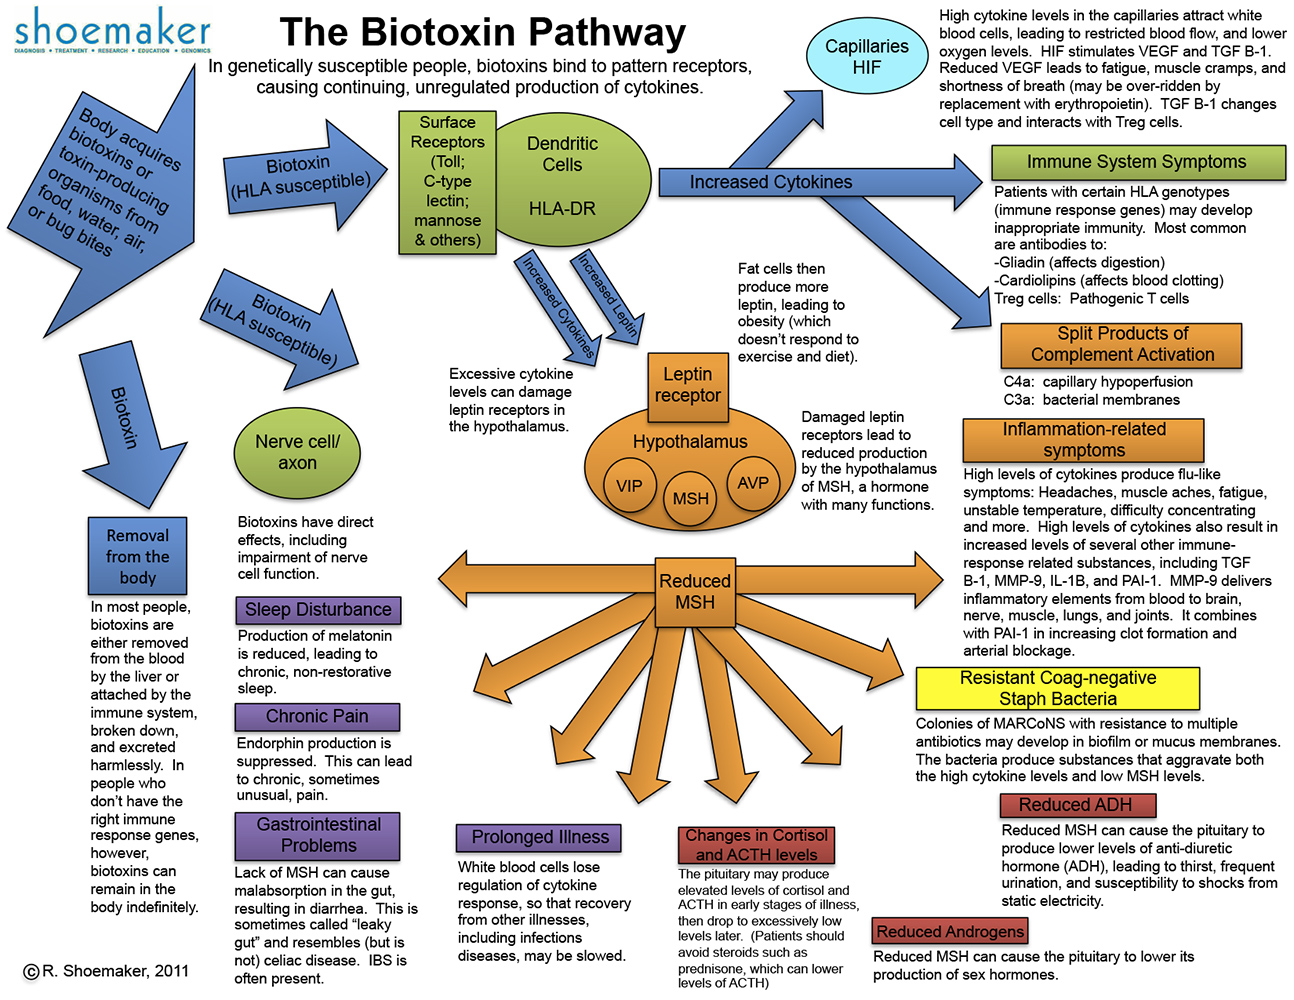 Dr. Ritchie Shoemaker, Biotoxin-Pathway